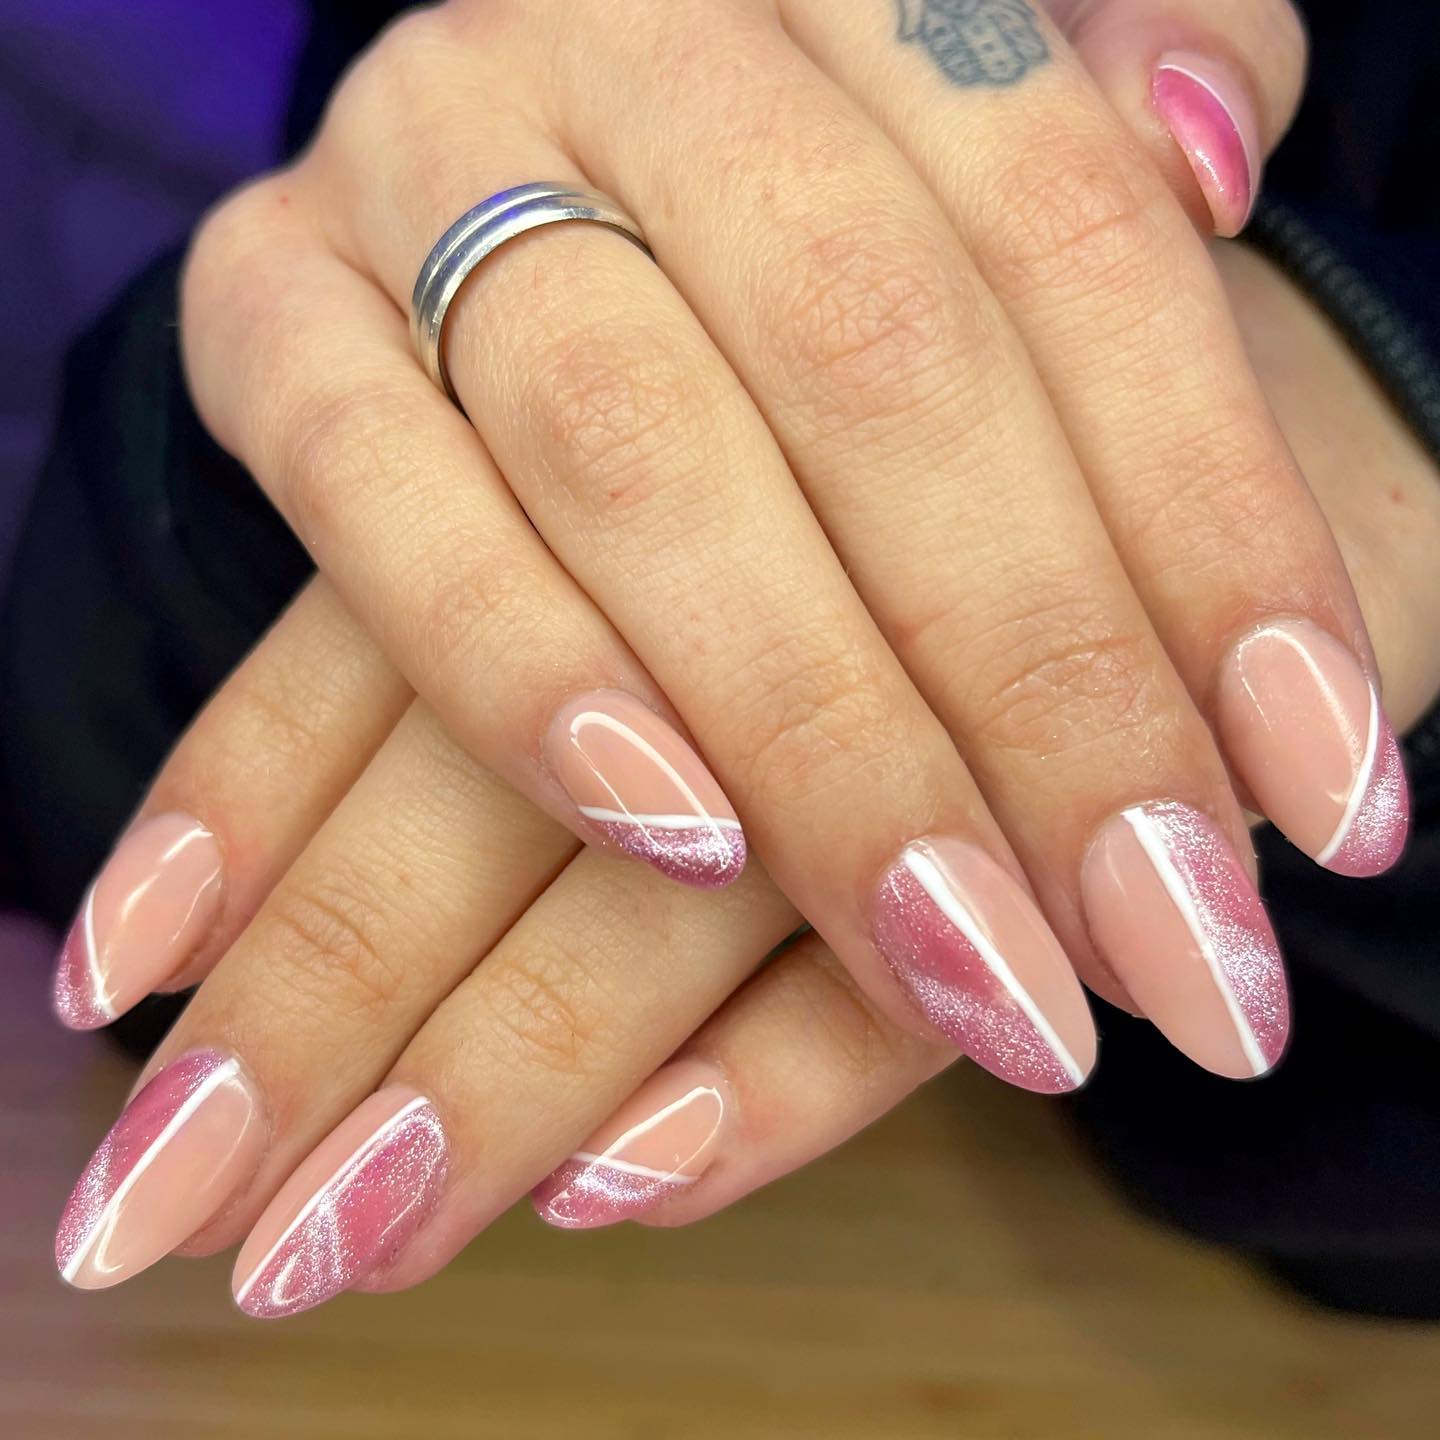 Full aurora nails may not be for you, so you can apply it on half of your nails like the one above. Half of your nail will be nude and the other half will be pink cat nail.